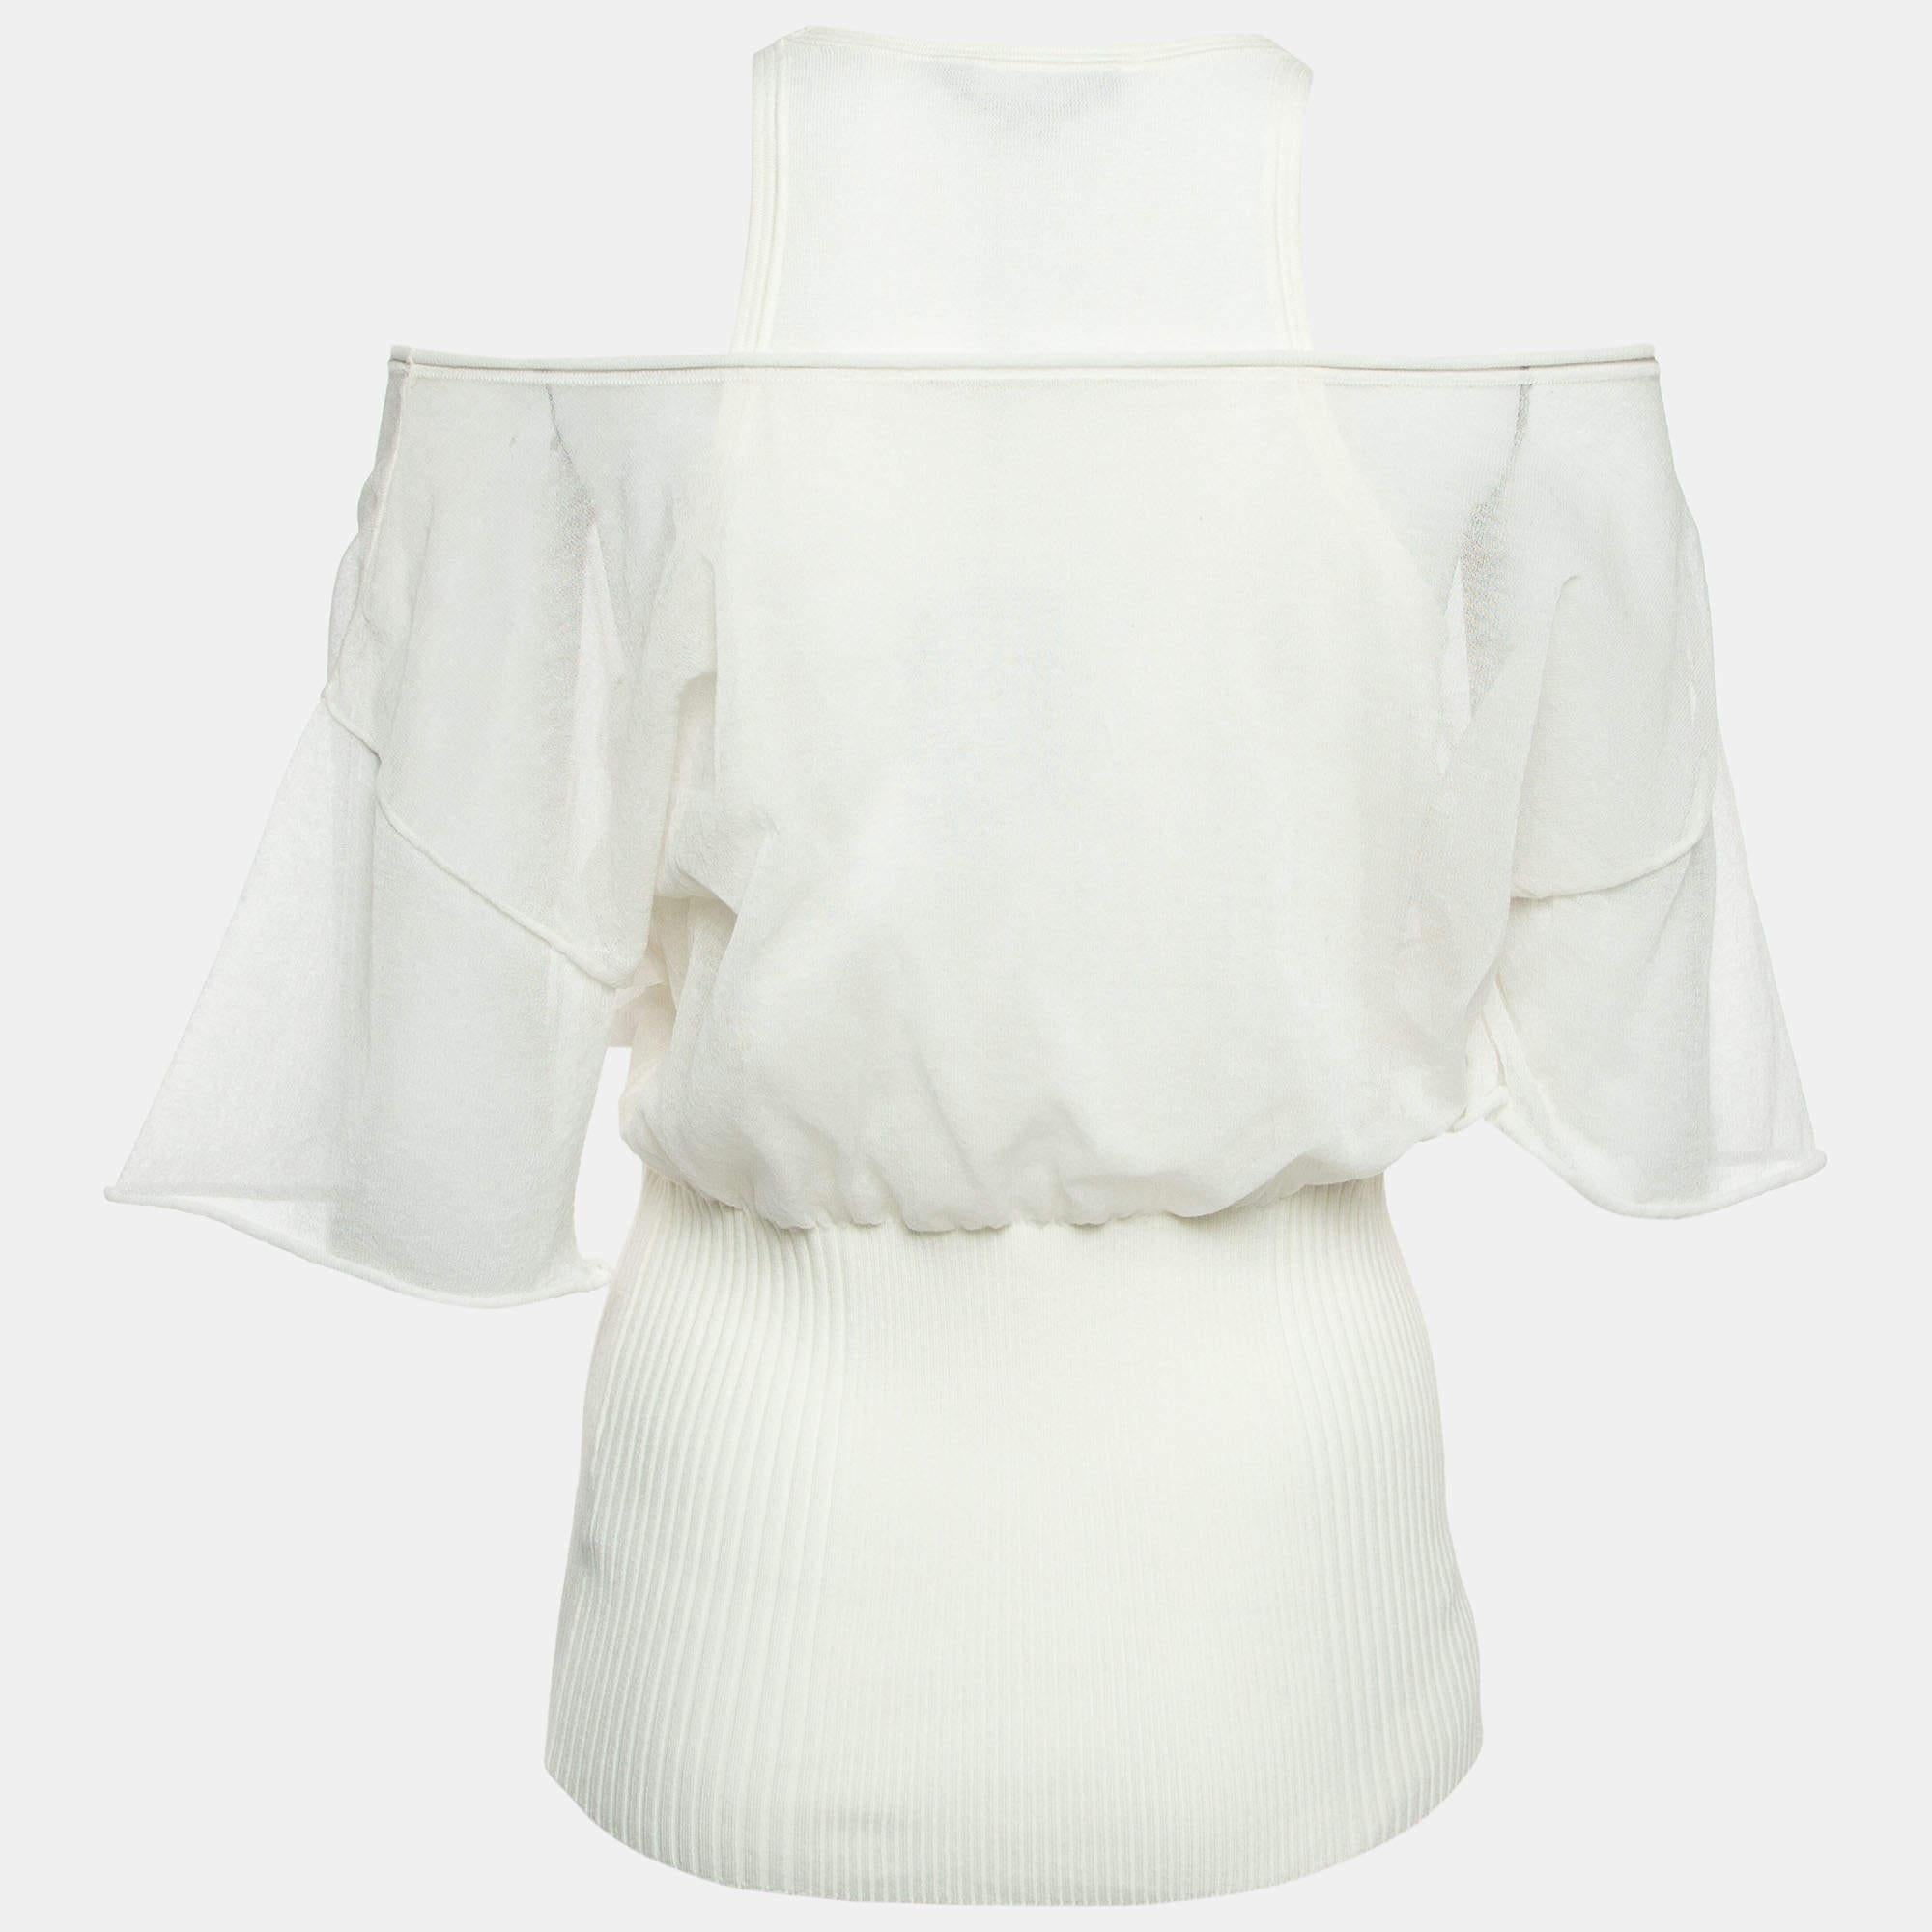 Careful tailoring, quality materials, and elegant cuts make this designer top a piece to cherish! It comes in a classic design to be easy to style.

Includes: Brand Tag